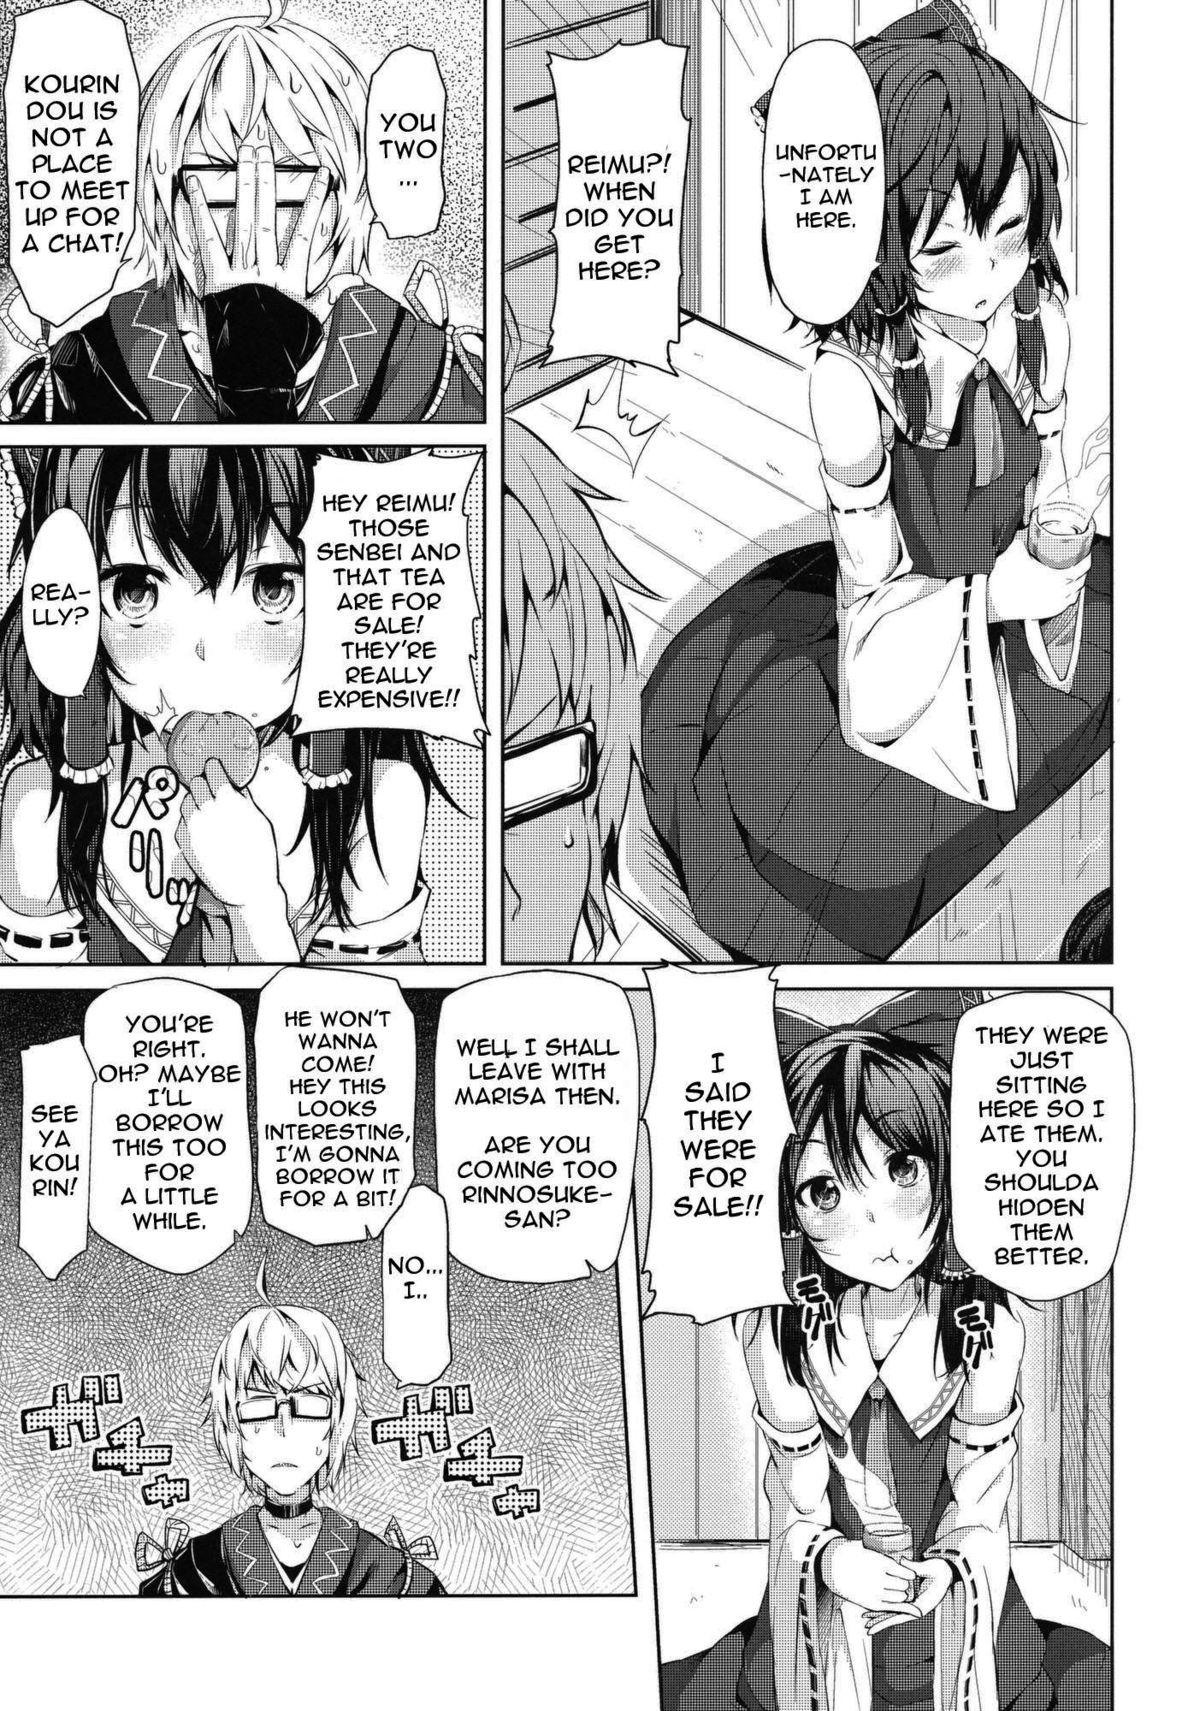 Submission Zutto Kourin no Turn! Turn 1 me | It's Always Kourin's Turn - First Turn - Touhou project Amigos - Page 6